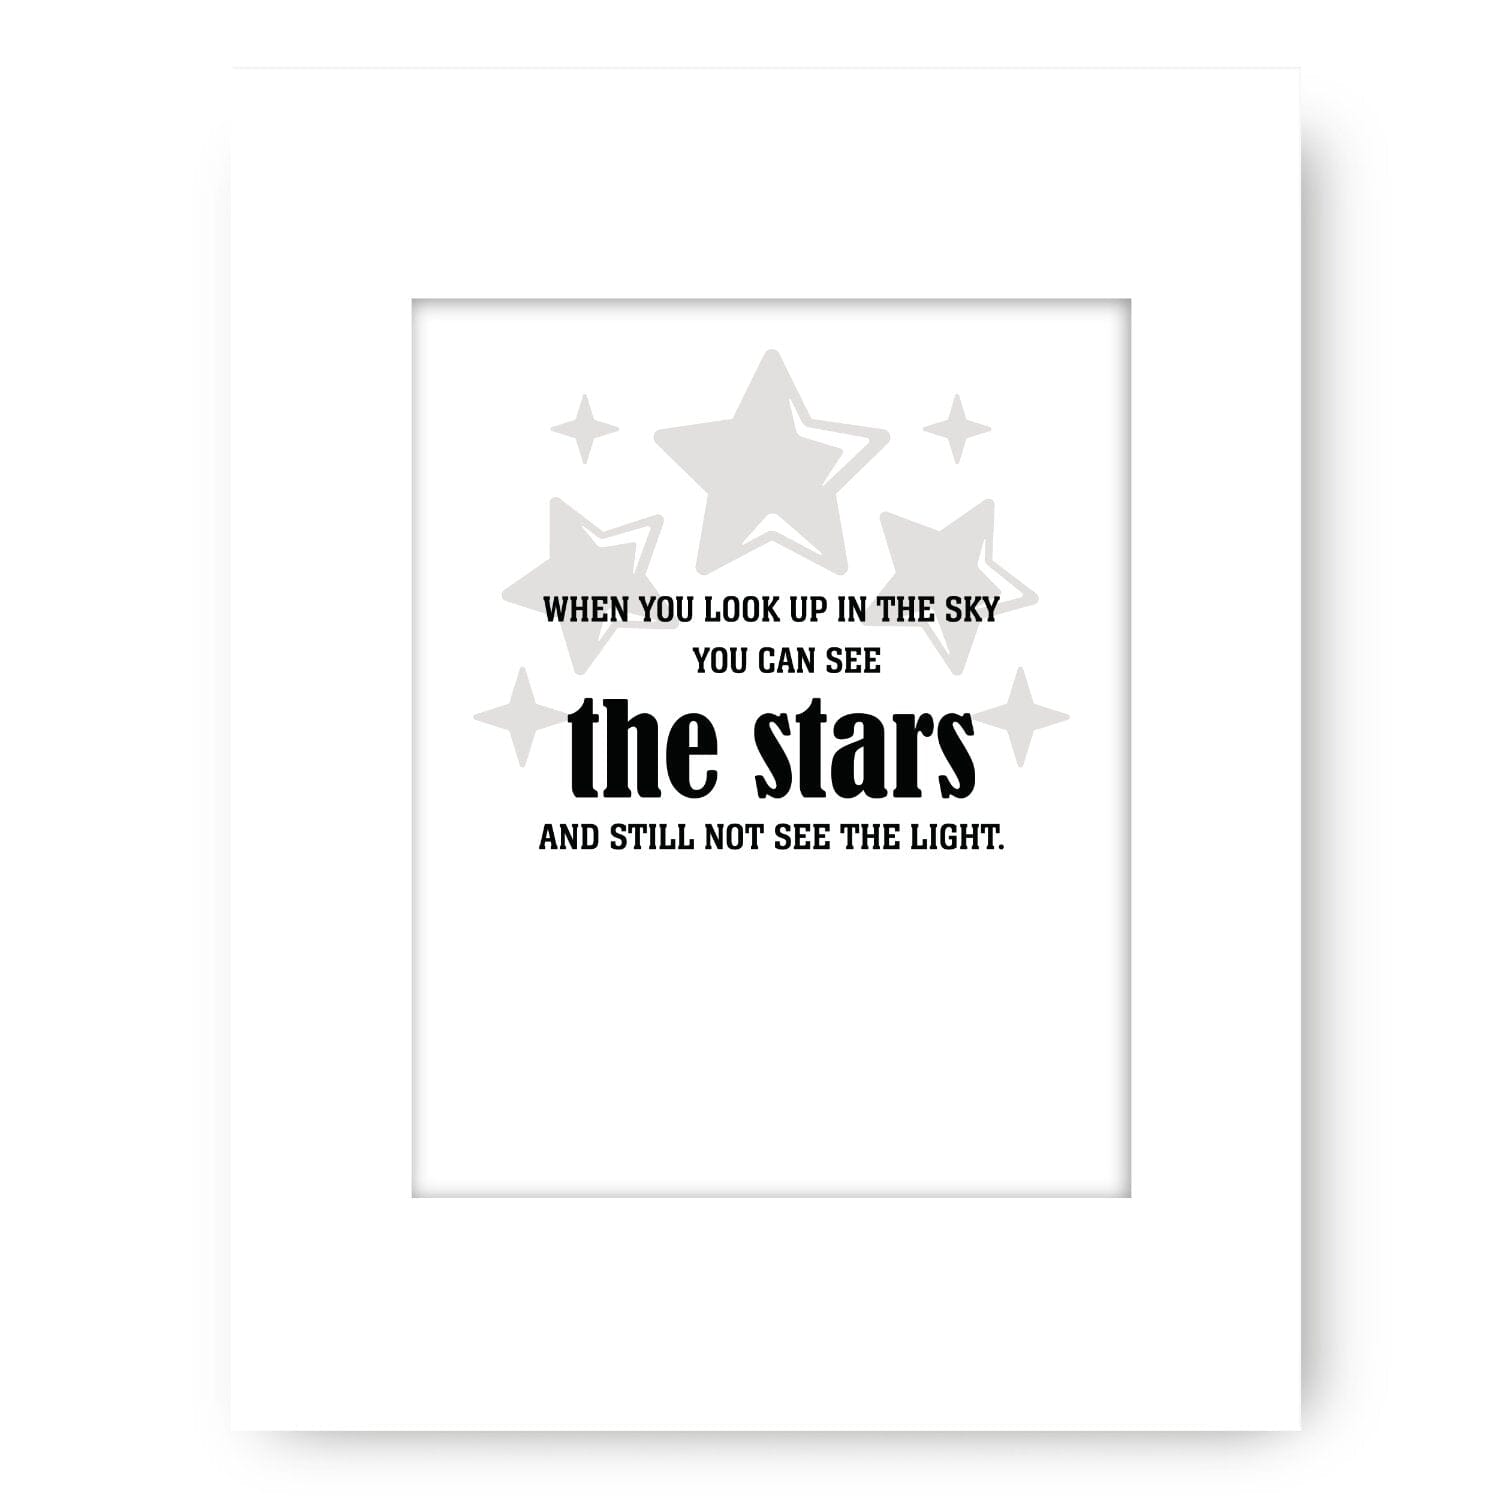 See the Stars and Still not see the Light - Wise and Witty Print Wise and Wiseass Quotes Song Lyrics Art 11x14 White Matted Print 